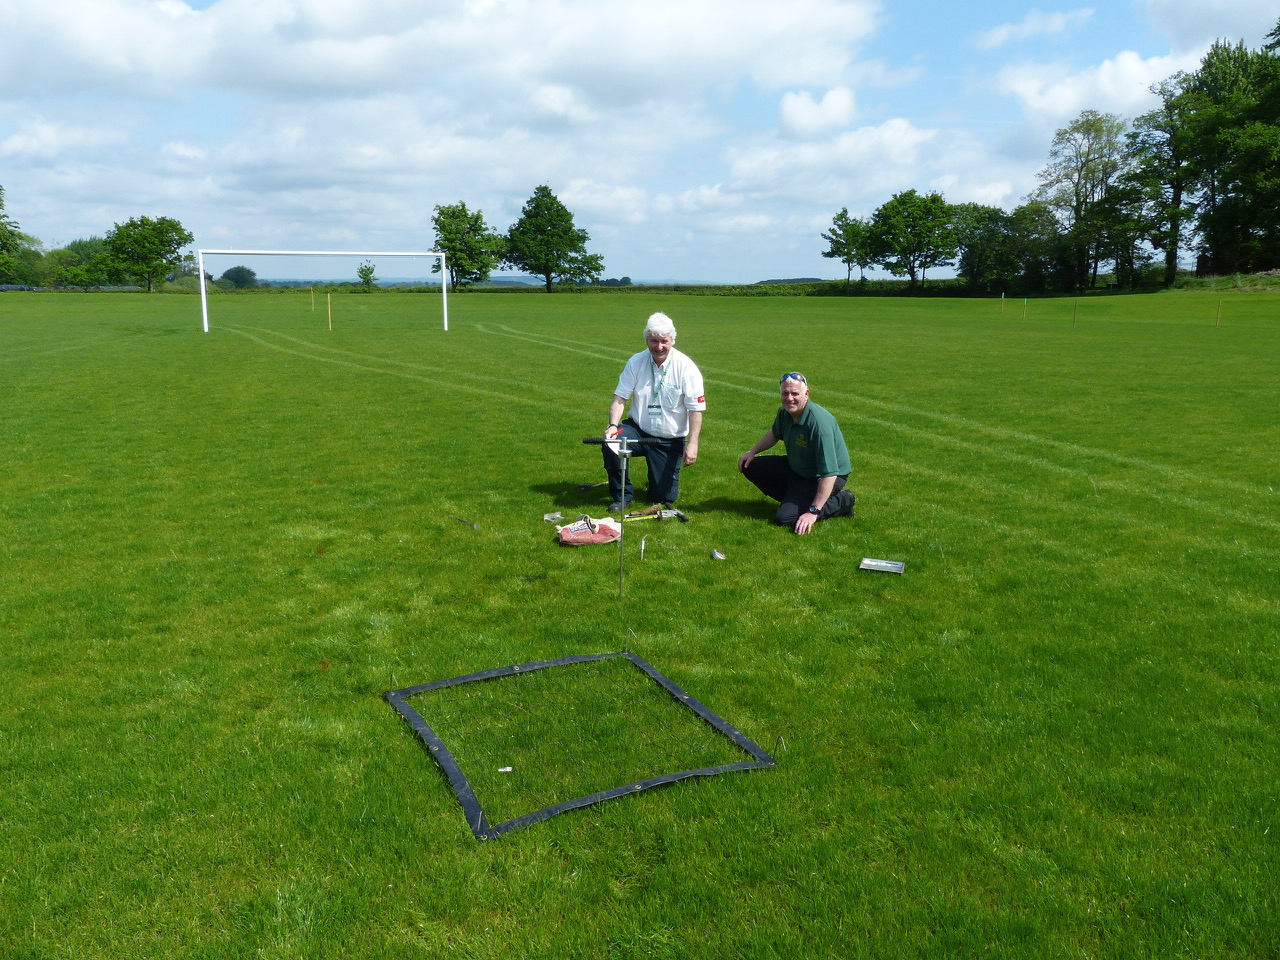  Institute of Groundsmanship Regional Advisor for the West Midlands Kevin Duffill carries out pitch inspection as part of his preparation of detailed written report.&nbsp; 